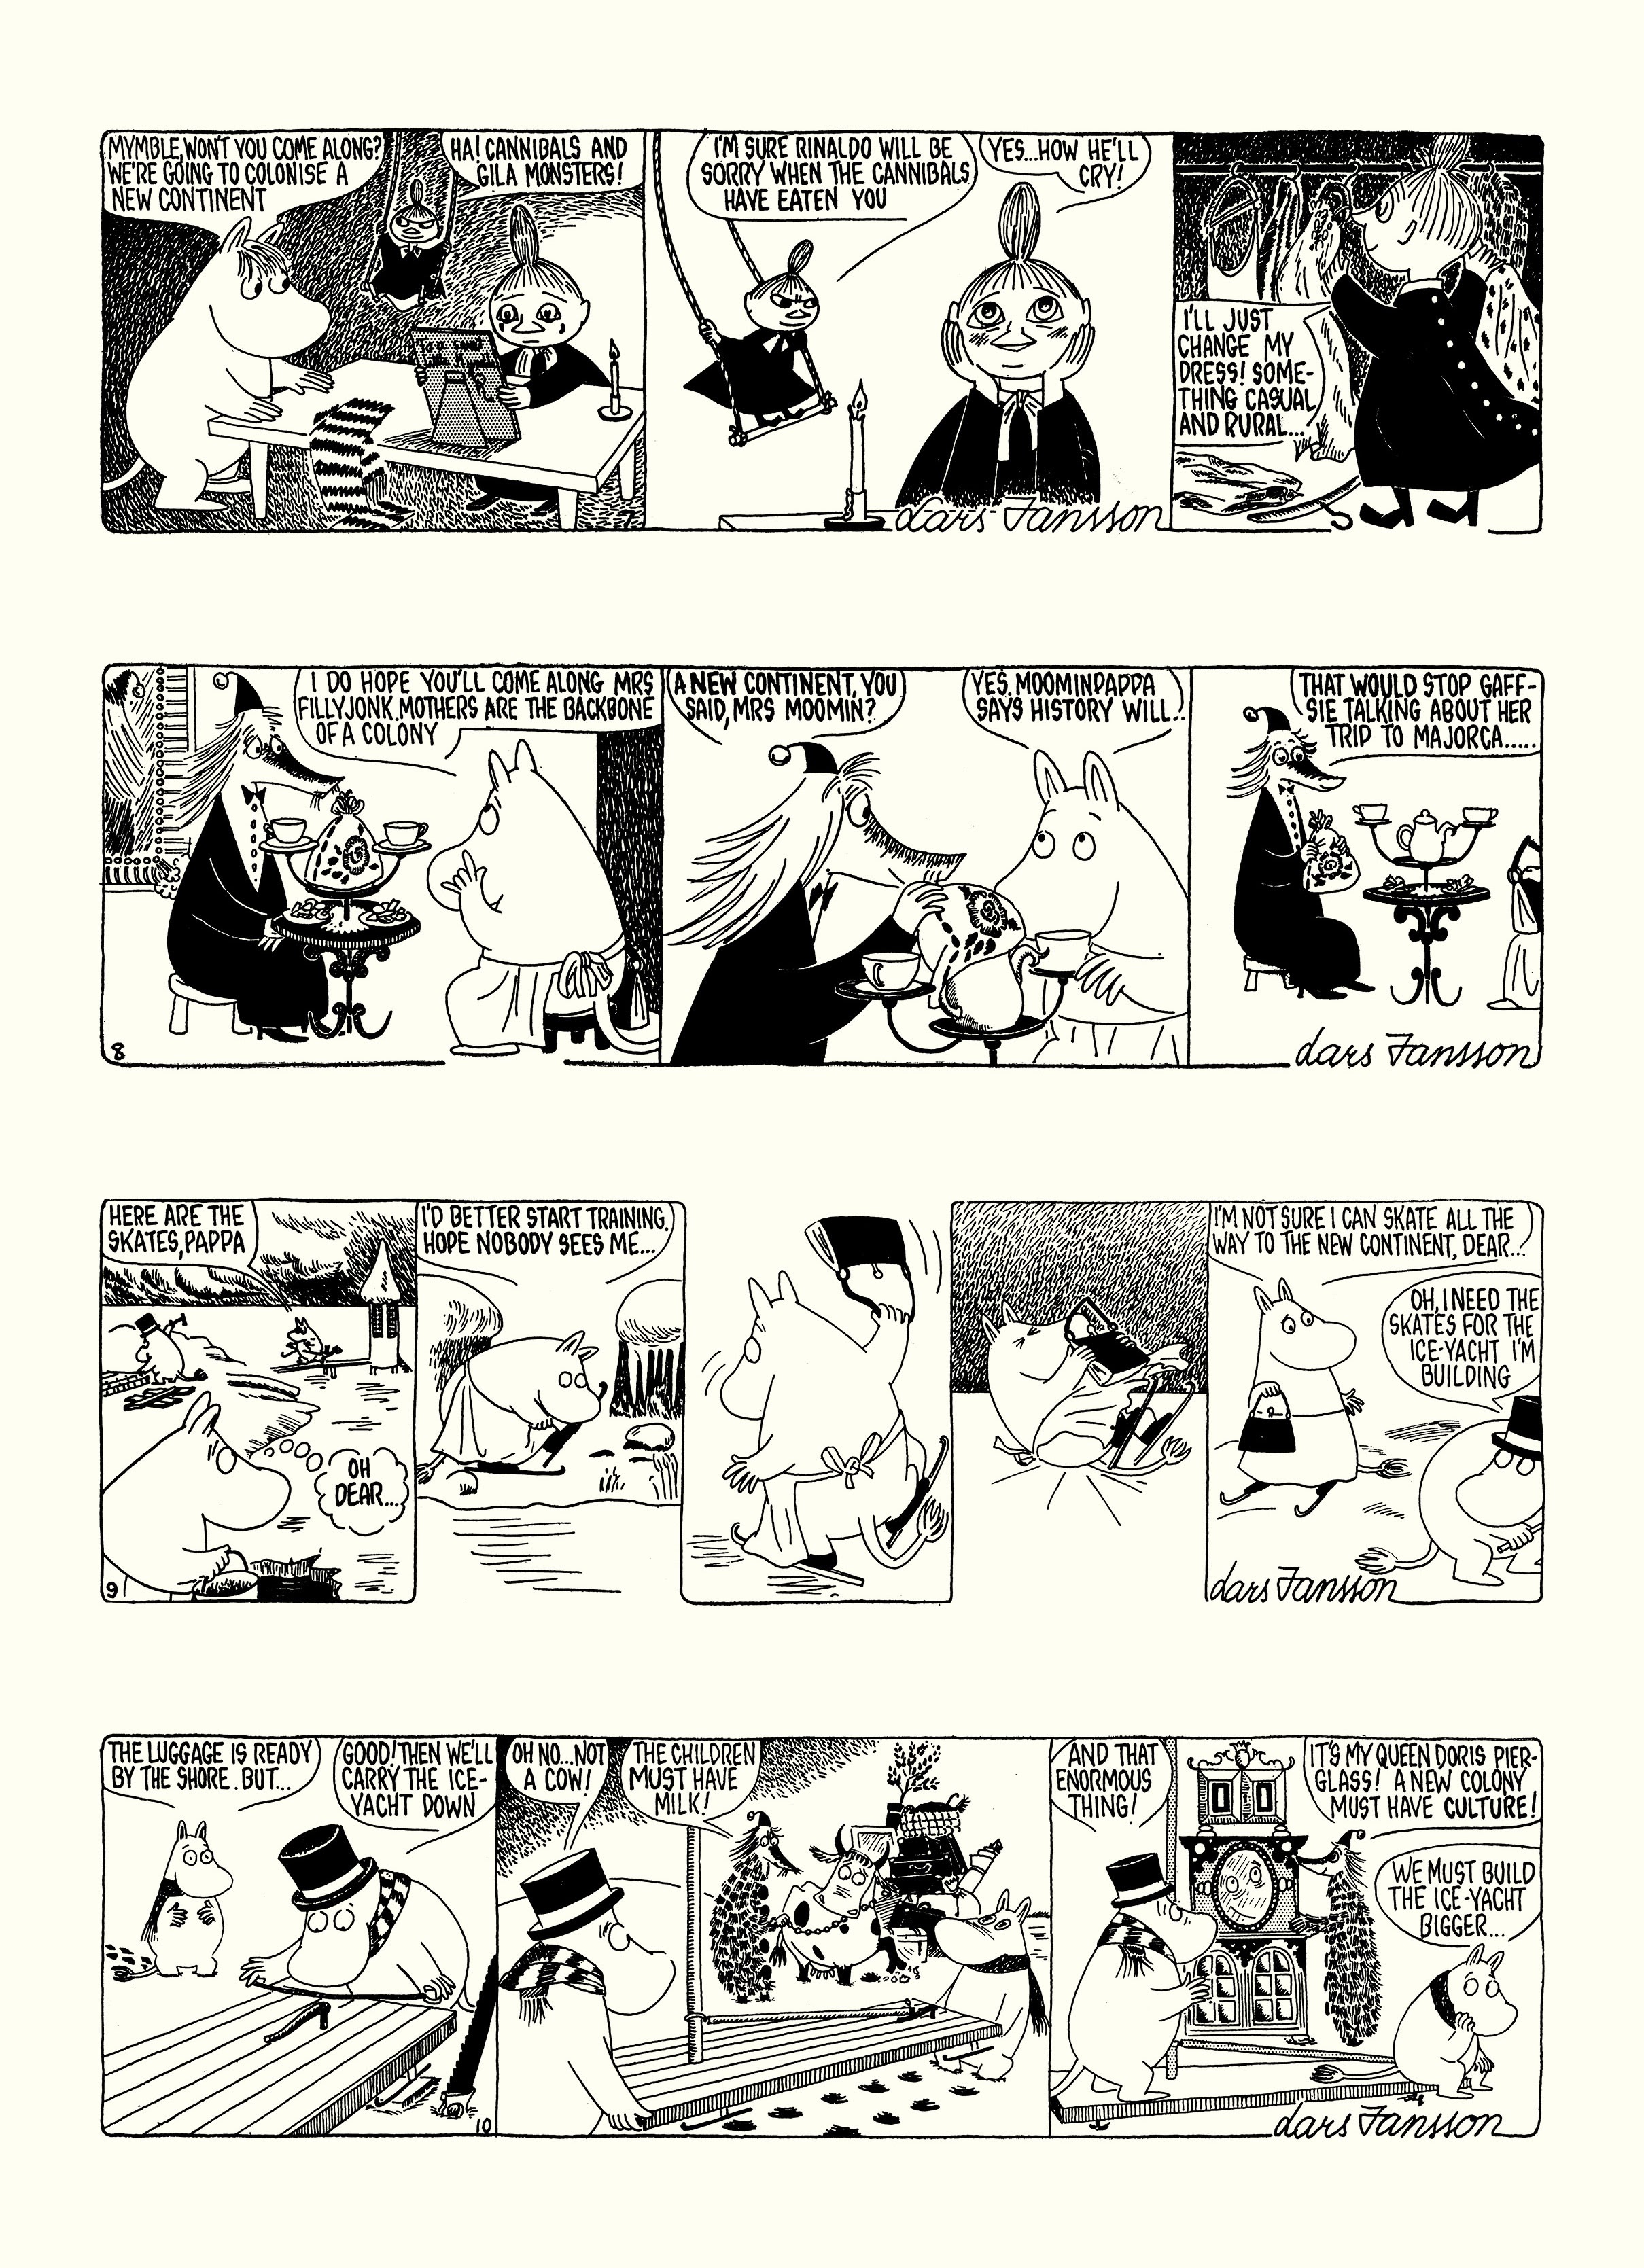 Read online Moomin: The Complete Lars Jansson Comic Strip comic -  Issue # TPB 7 - 8